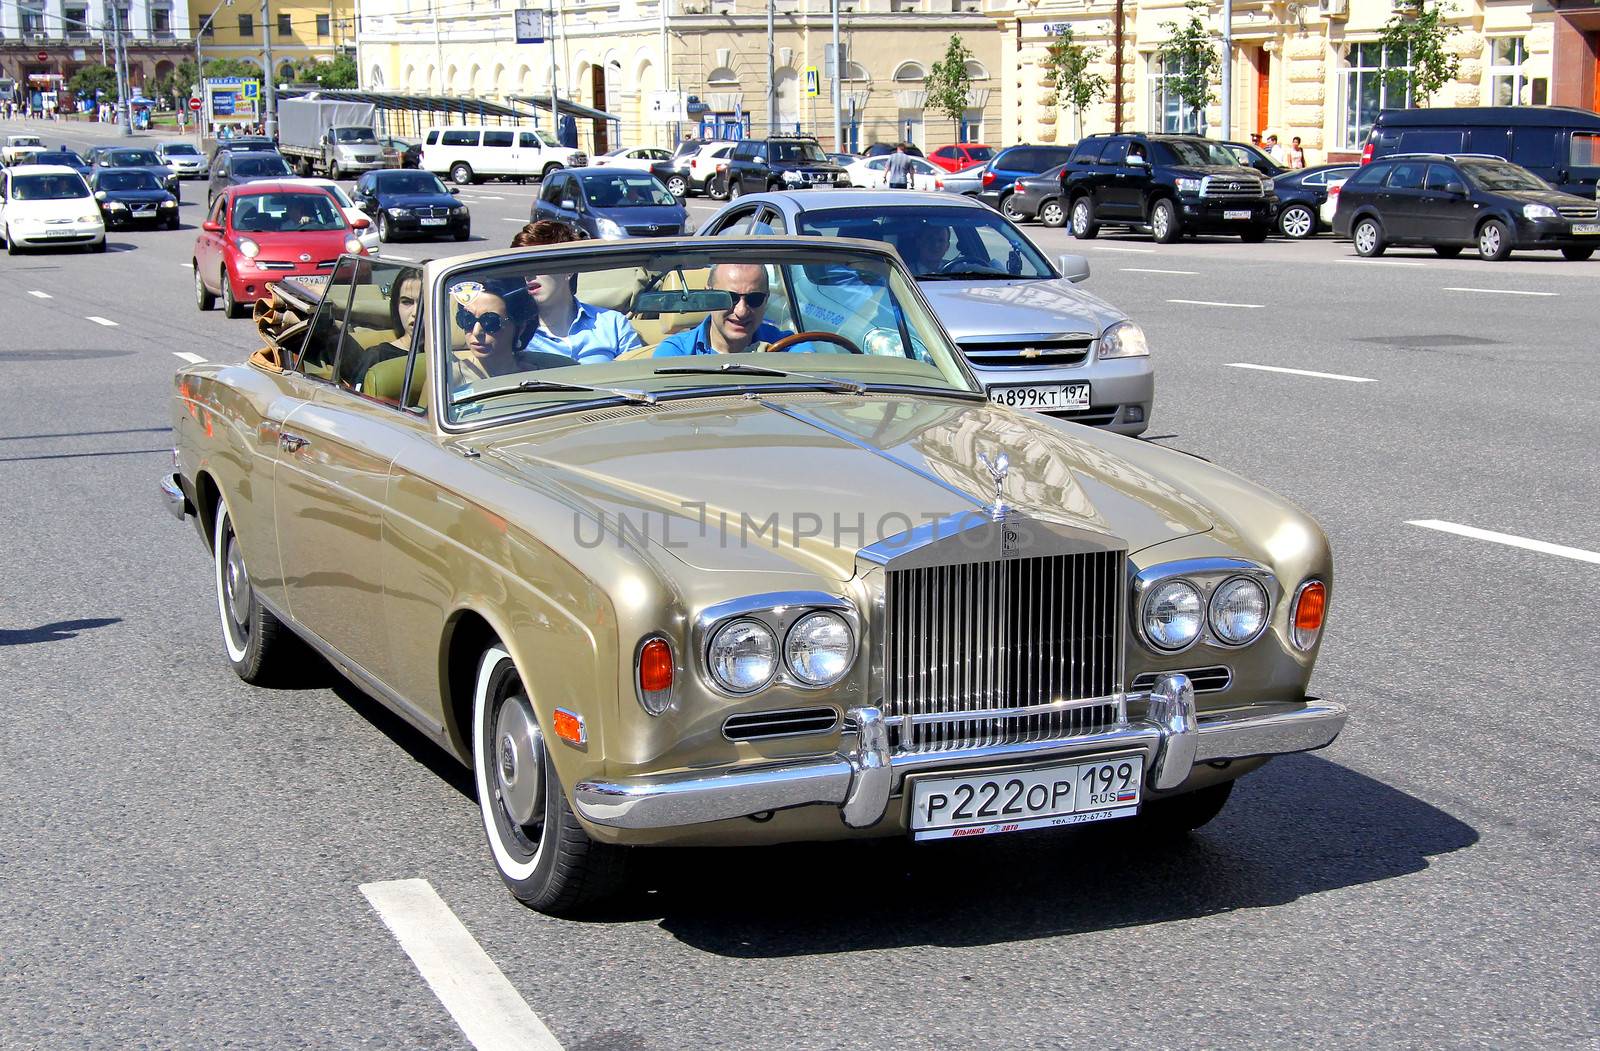 MOSCOW, RUSSIA - JUNE 2: English motor car Rolls-Royce Corniche competes at the annual L.U.C. Chopard Classic Weekend Rally on June 2, 2013 in Moscow, Russia.